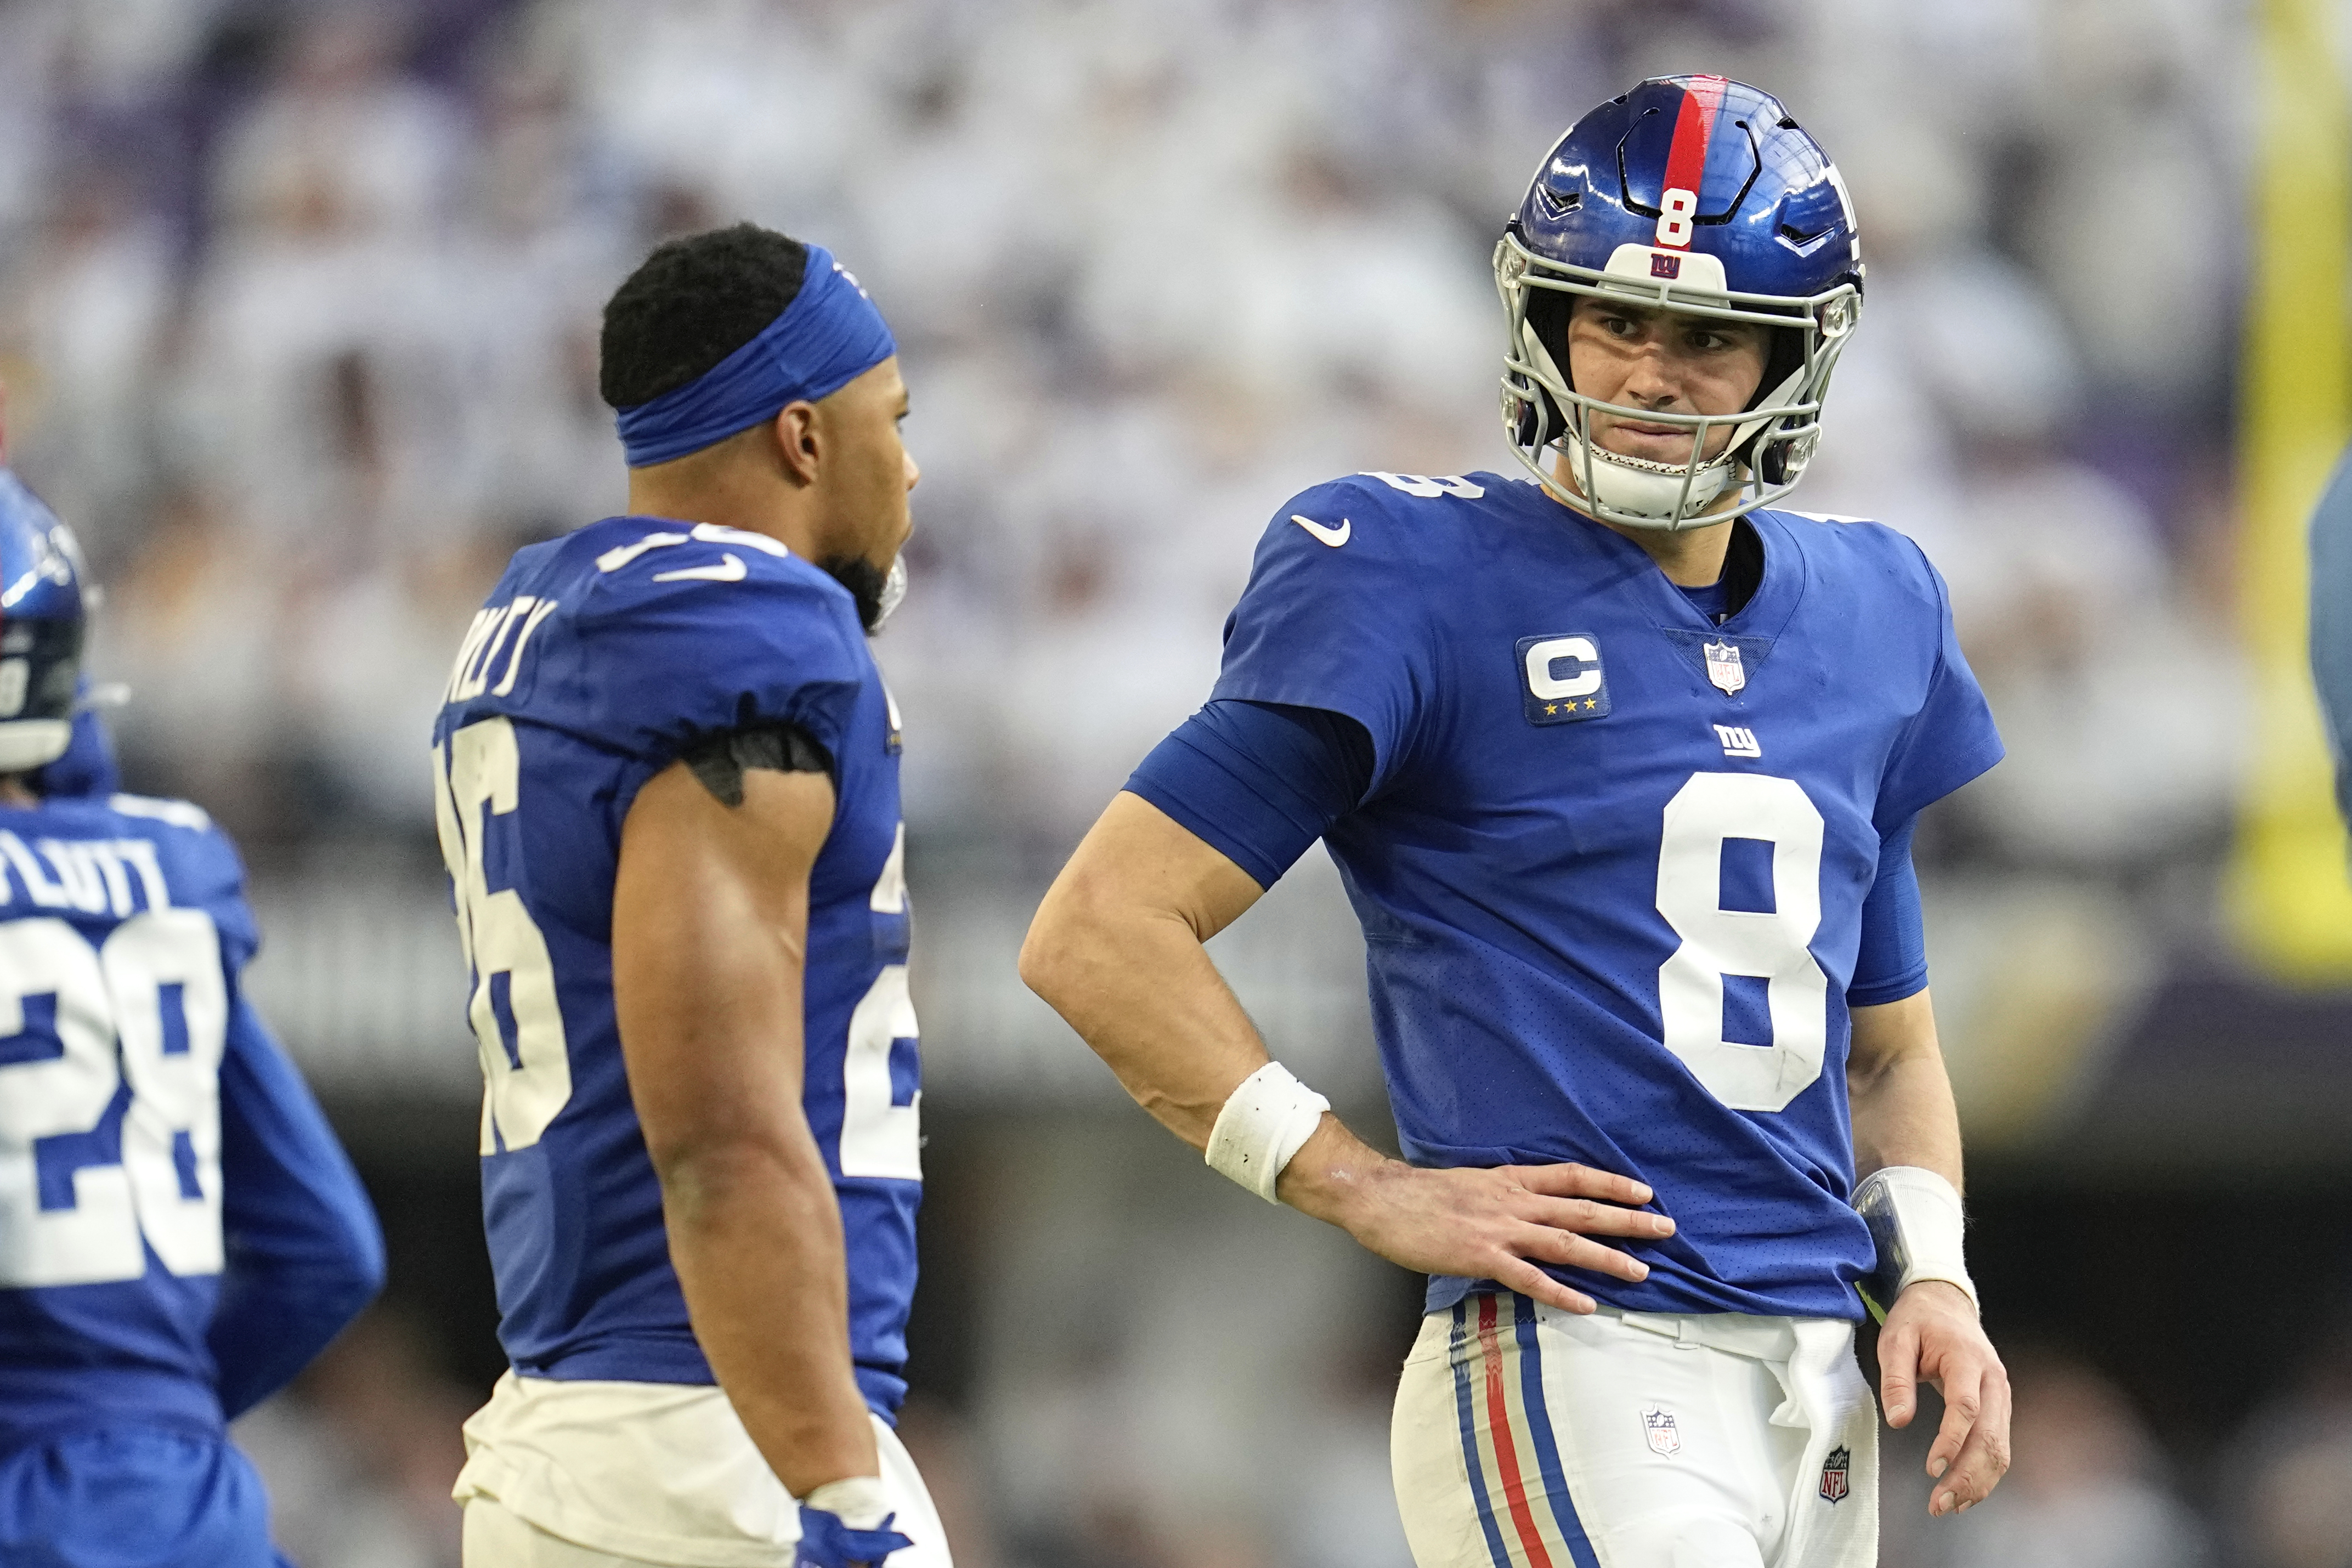 Giants vs. Colts: Time, television, radio and streaming schedule